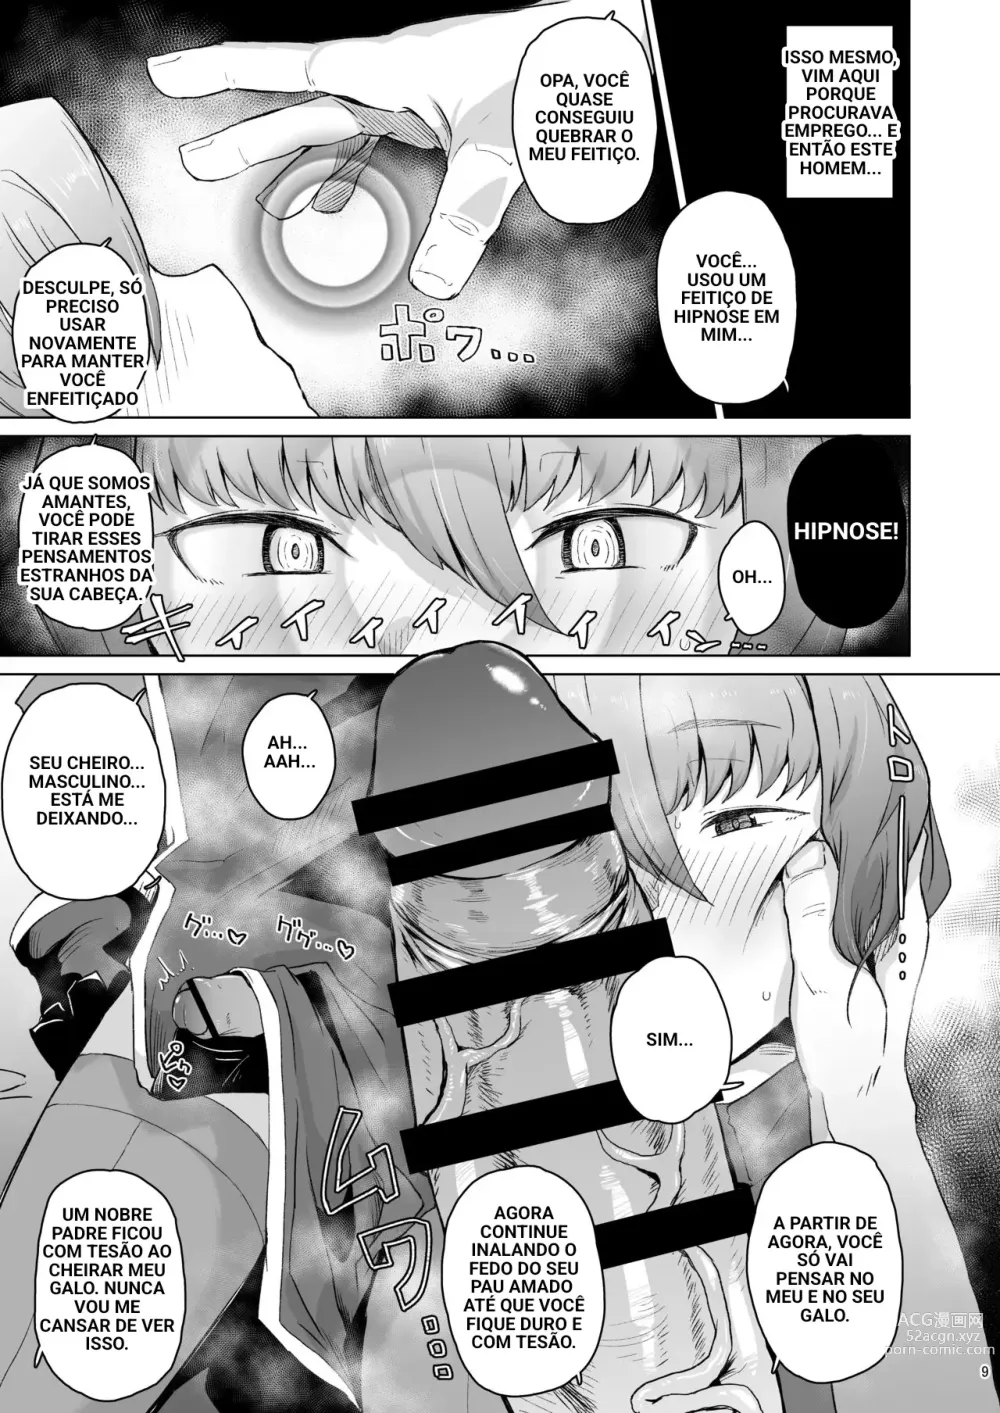 Page 7 of doujinshi Priest Hypnosis -Forcing Celibate Crossdressing Priest to Ejaculate-